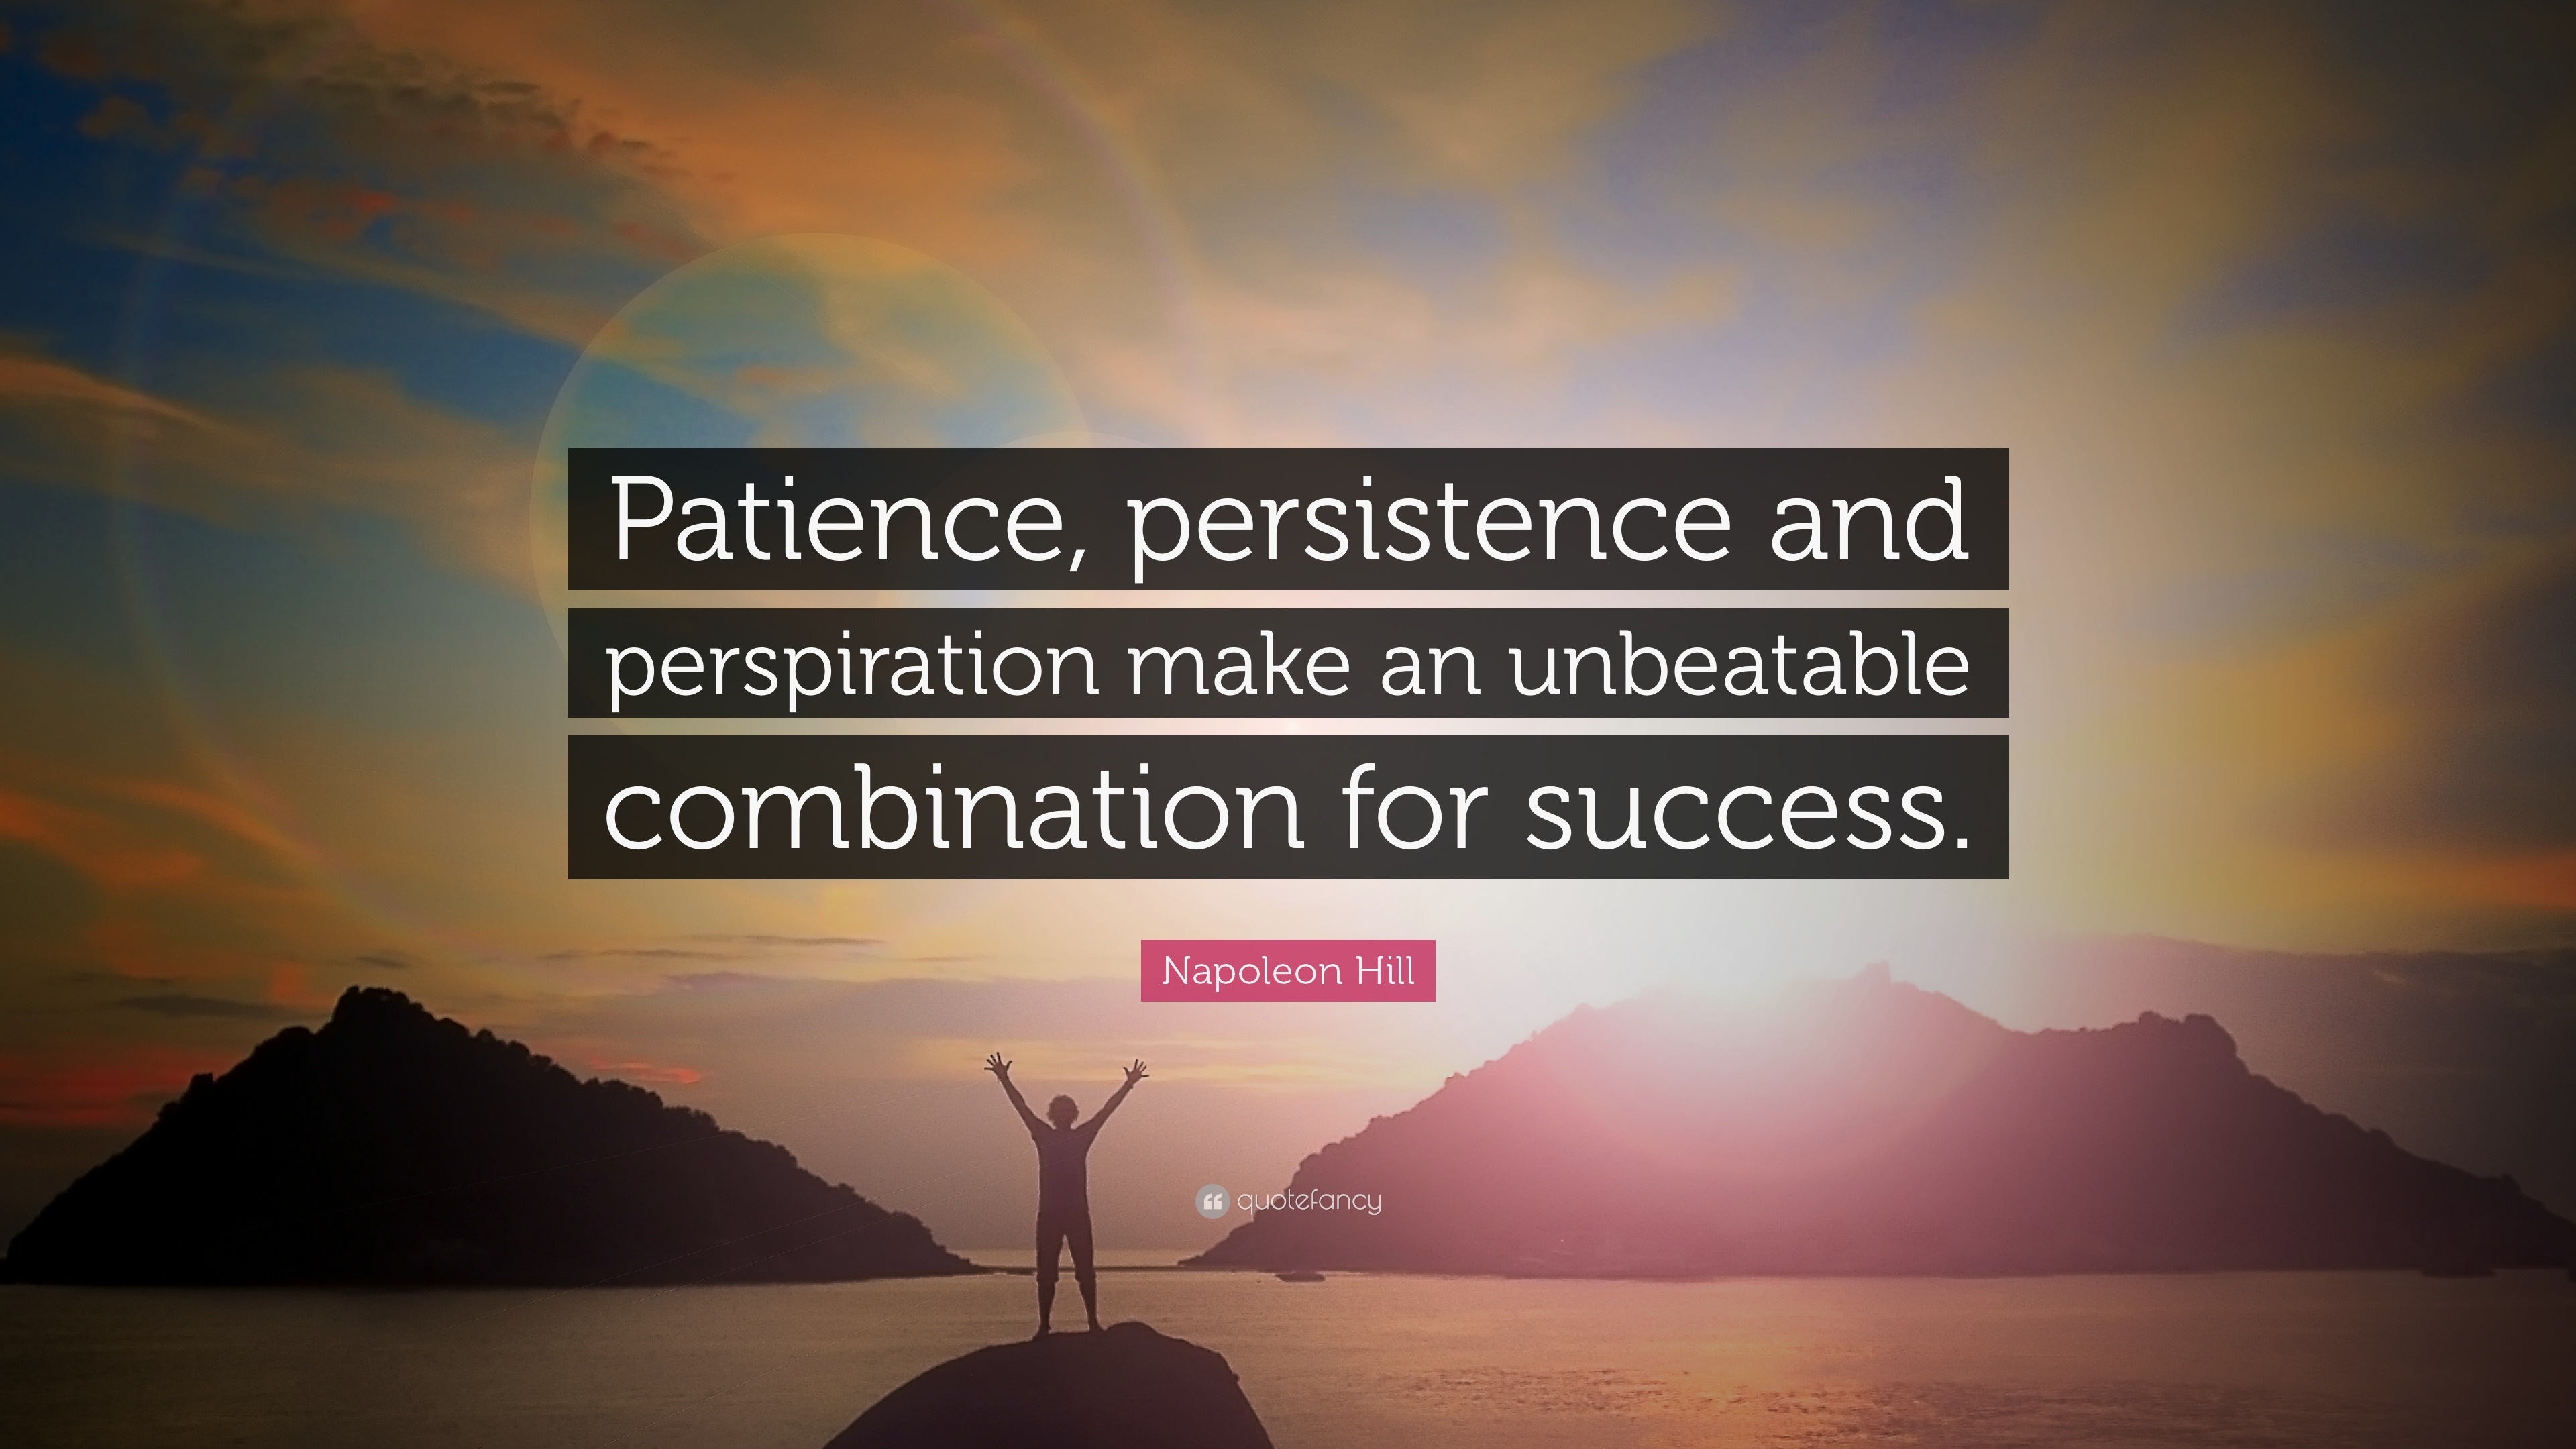 Napoleon Hill Quote “Patience, persistence and